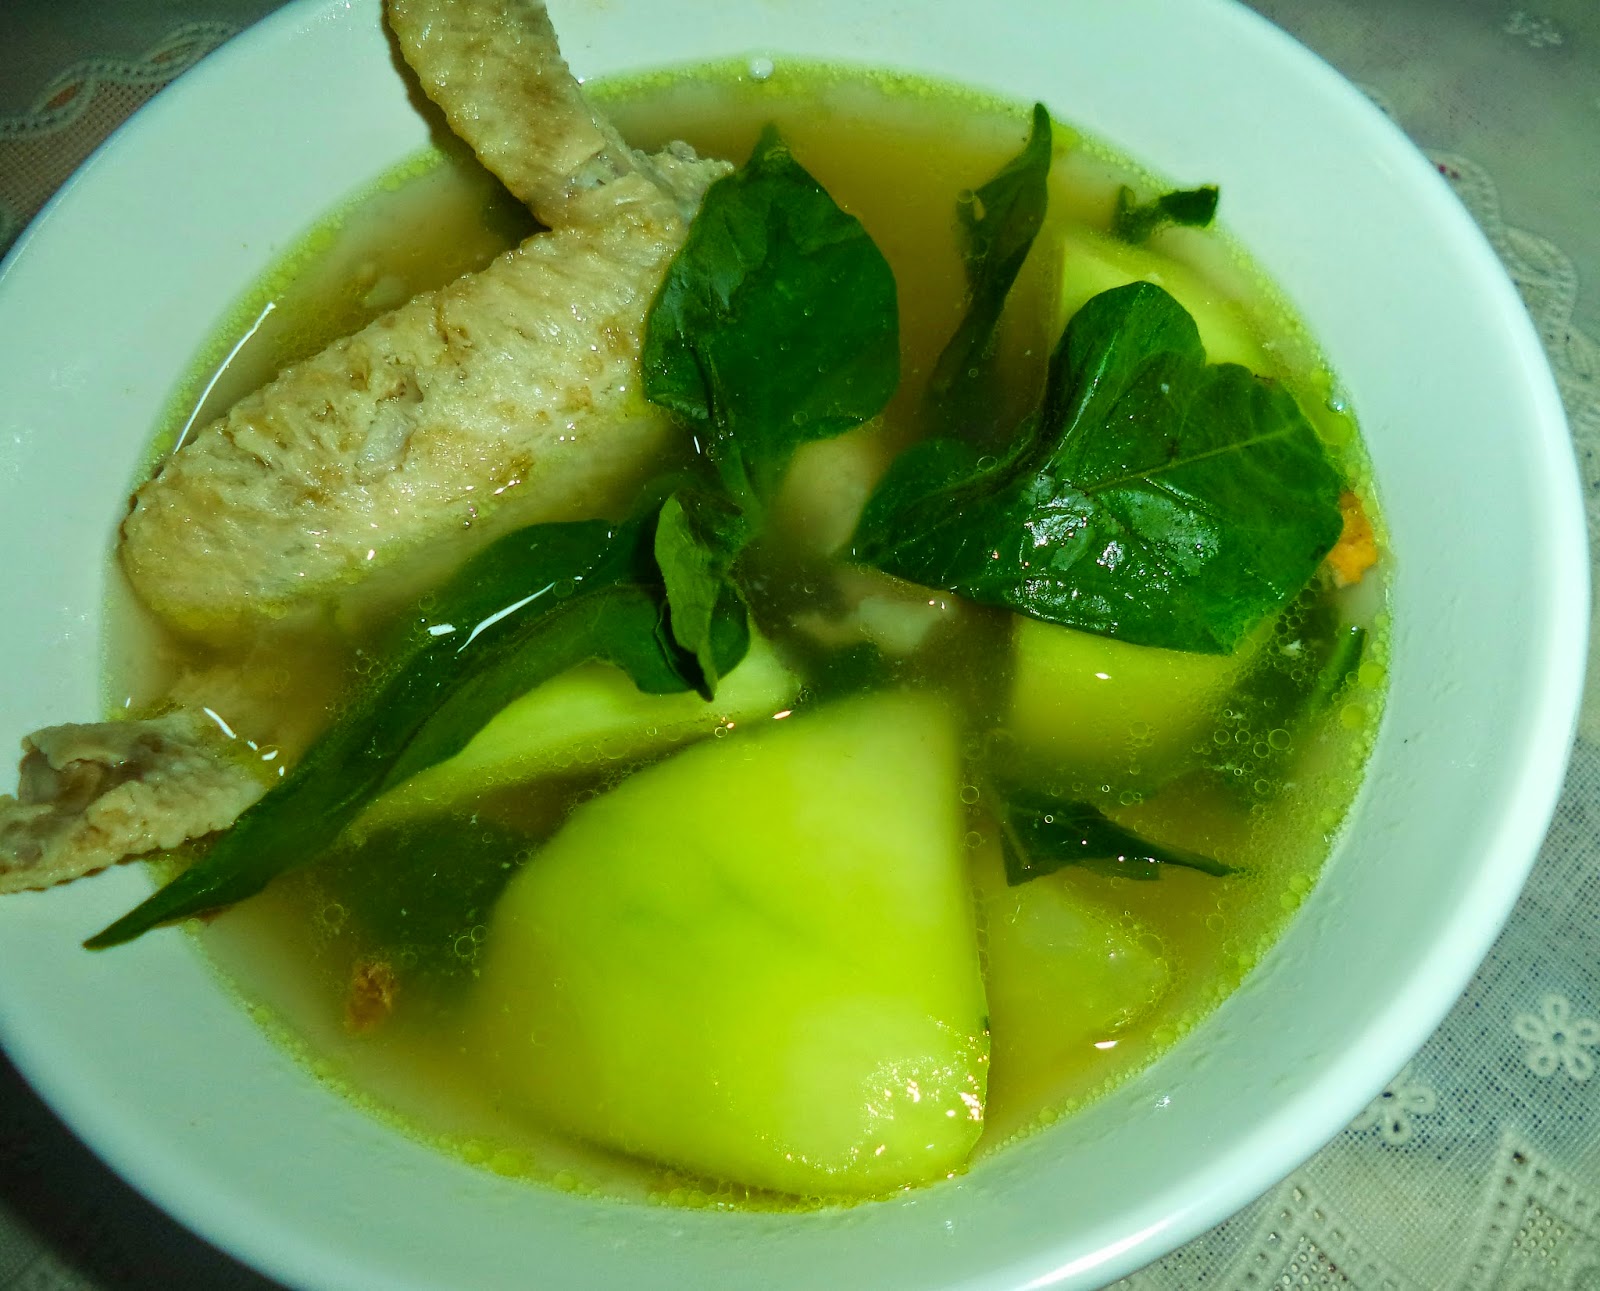 This is an authentic Filipino dish in the Philippines.